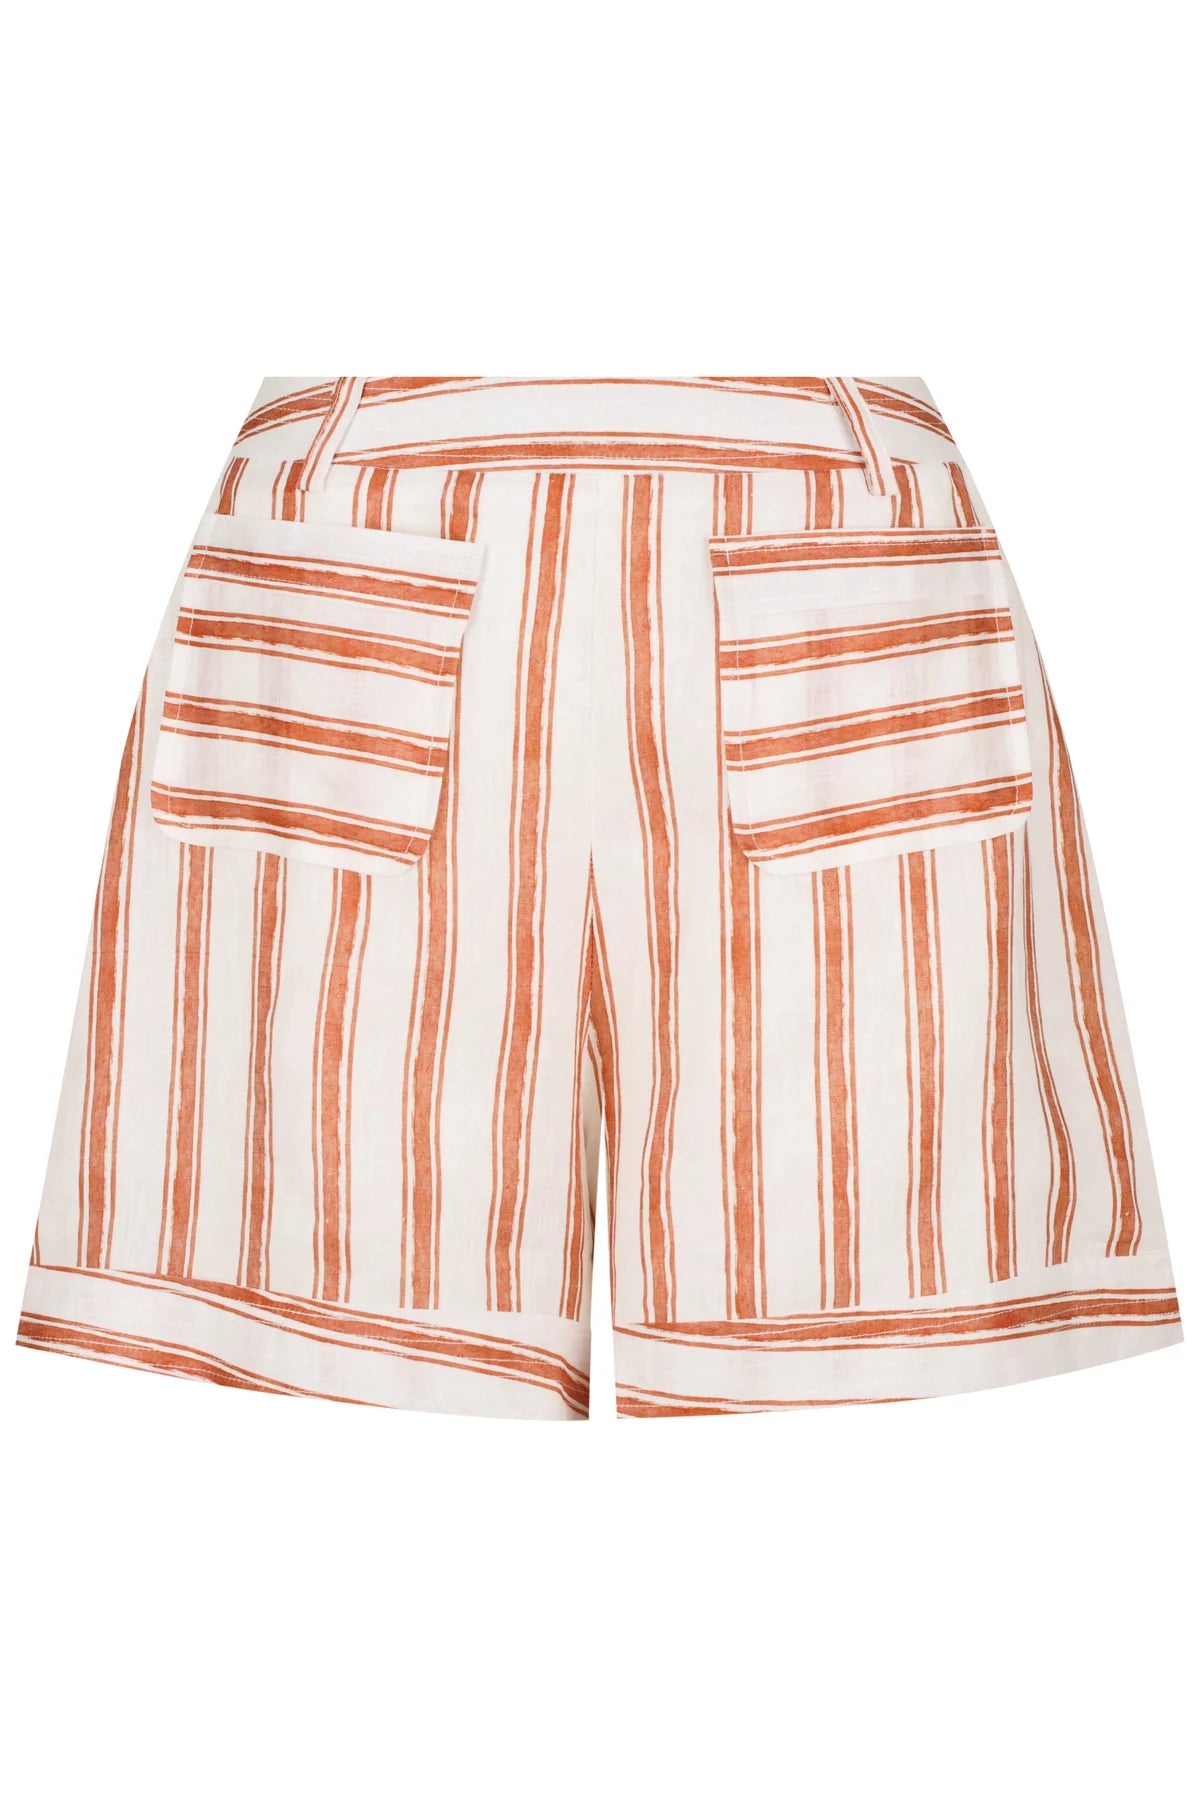 White and brown striped high waisted shorts 